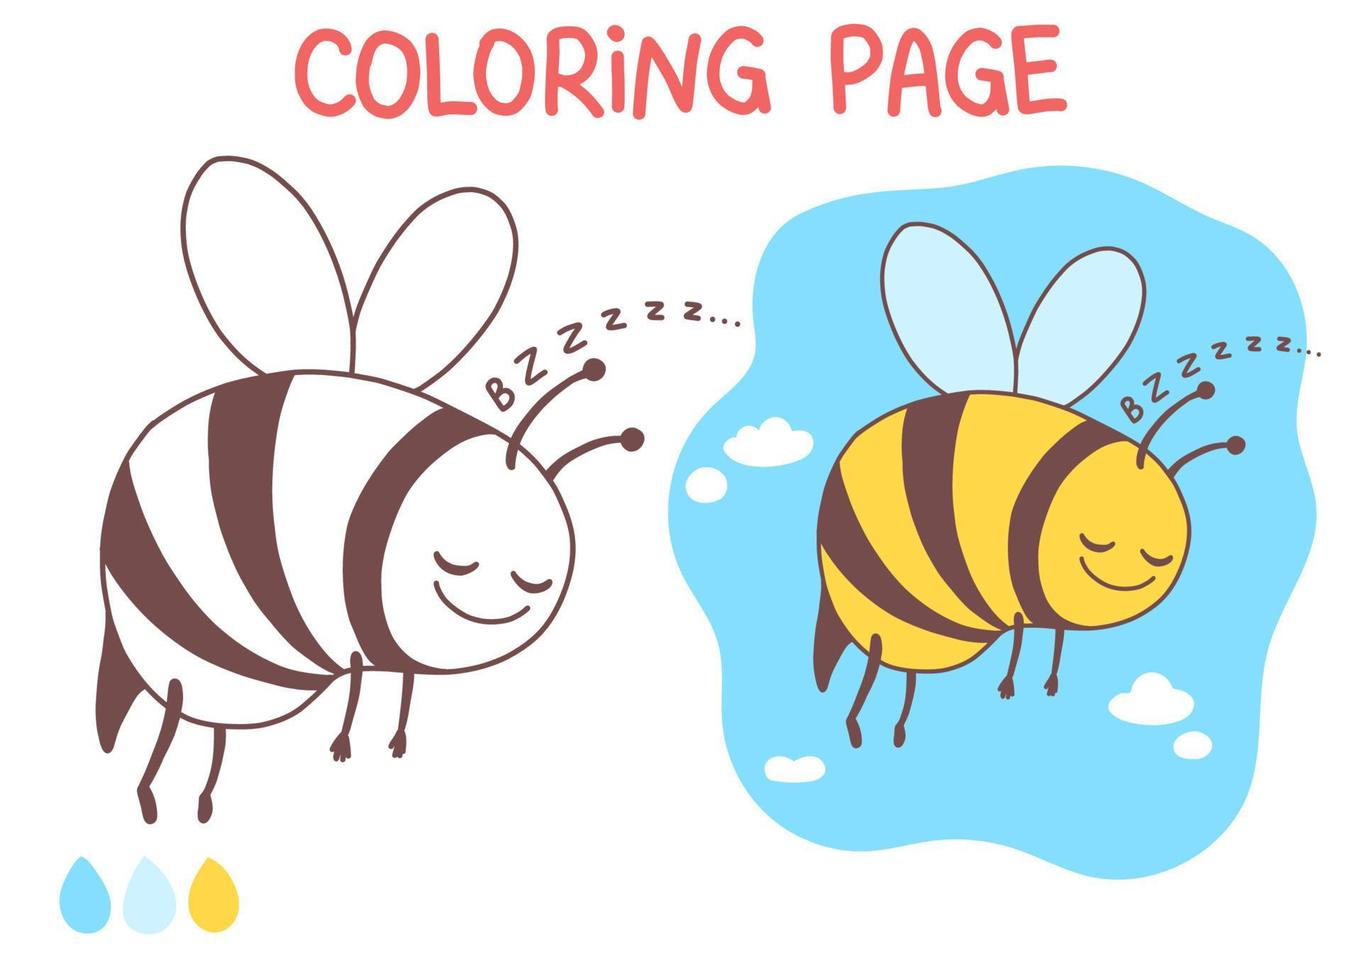 Bee coloring page funny and cute doodle vector illustration illustration